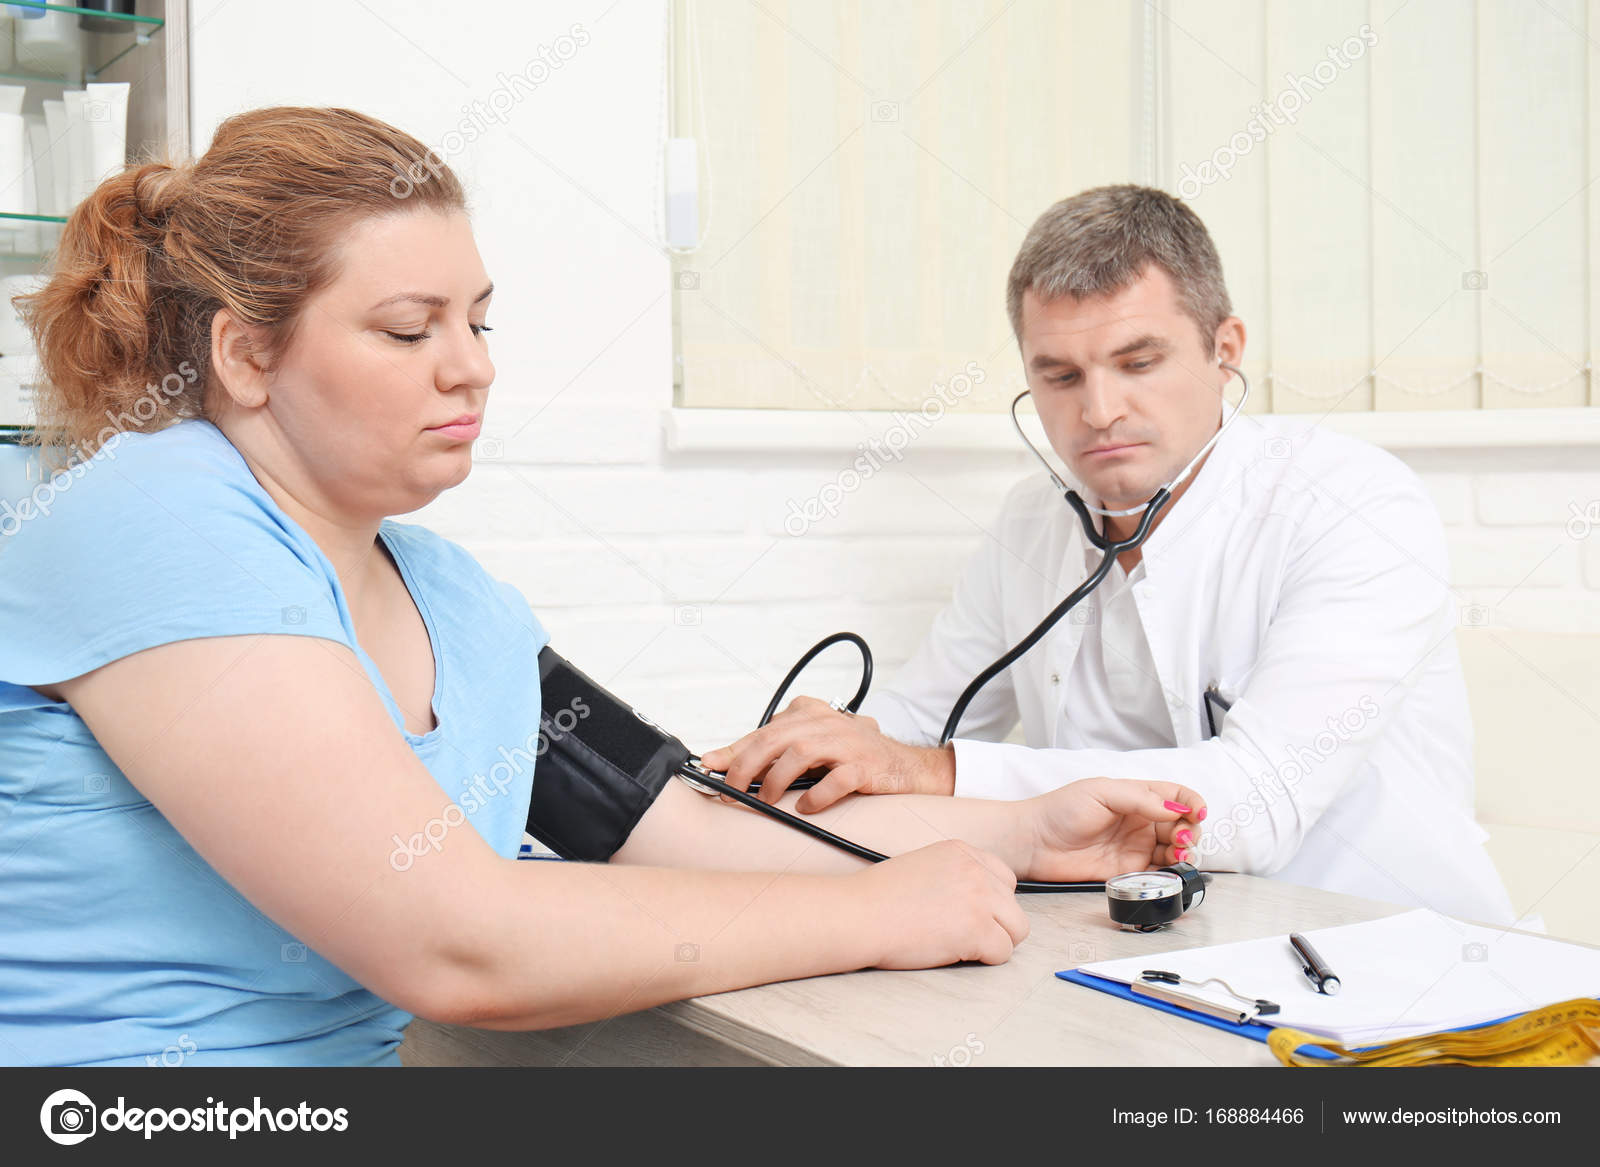 how to measure blood pressure in obese patients